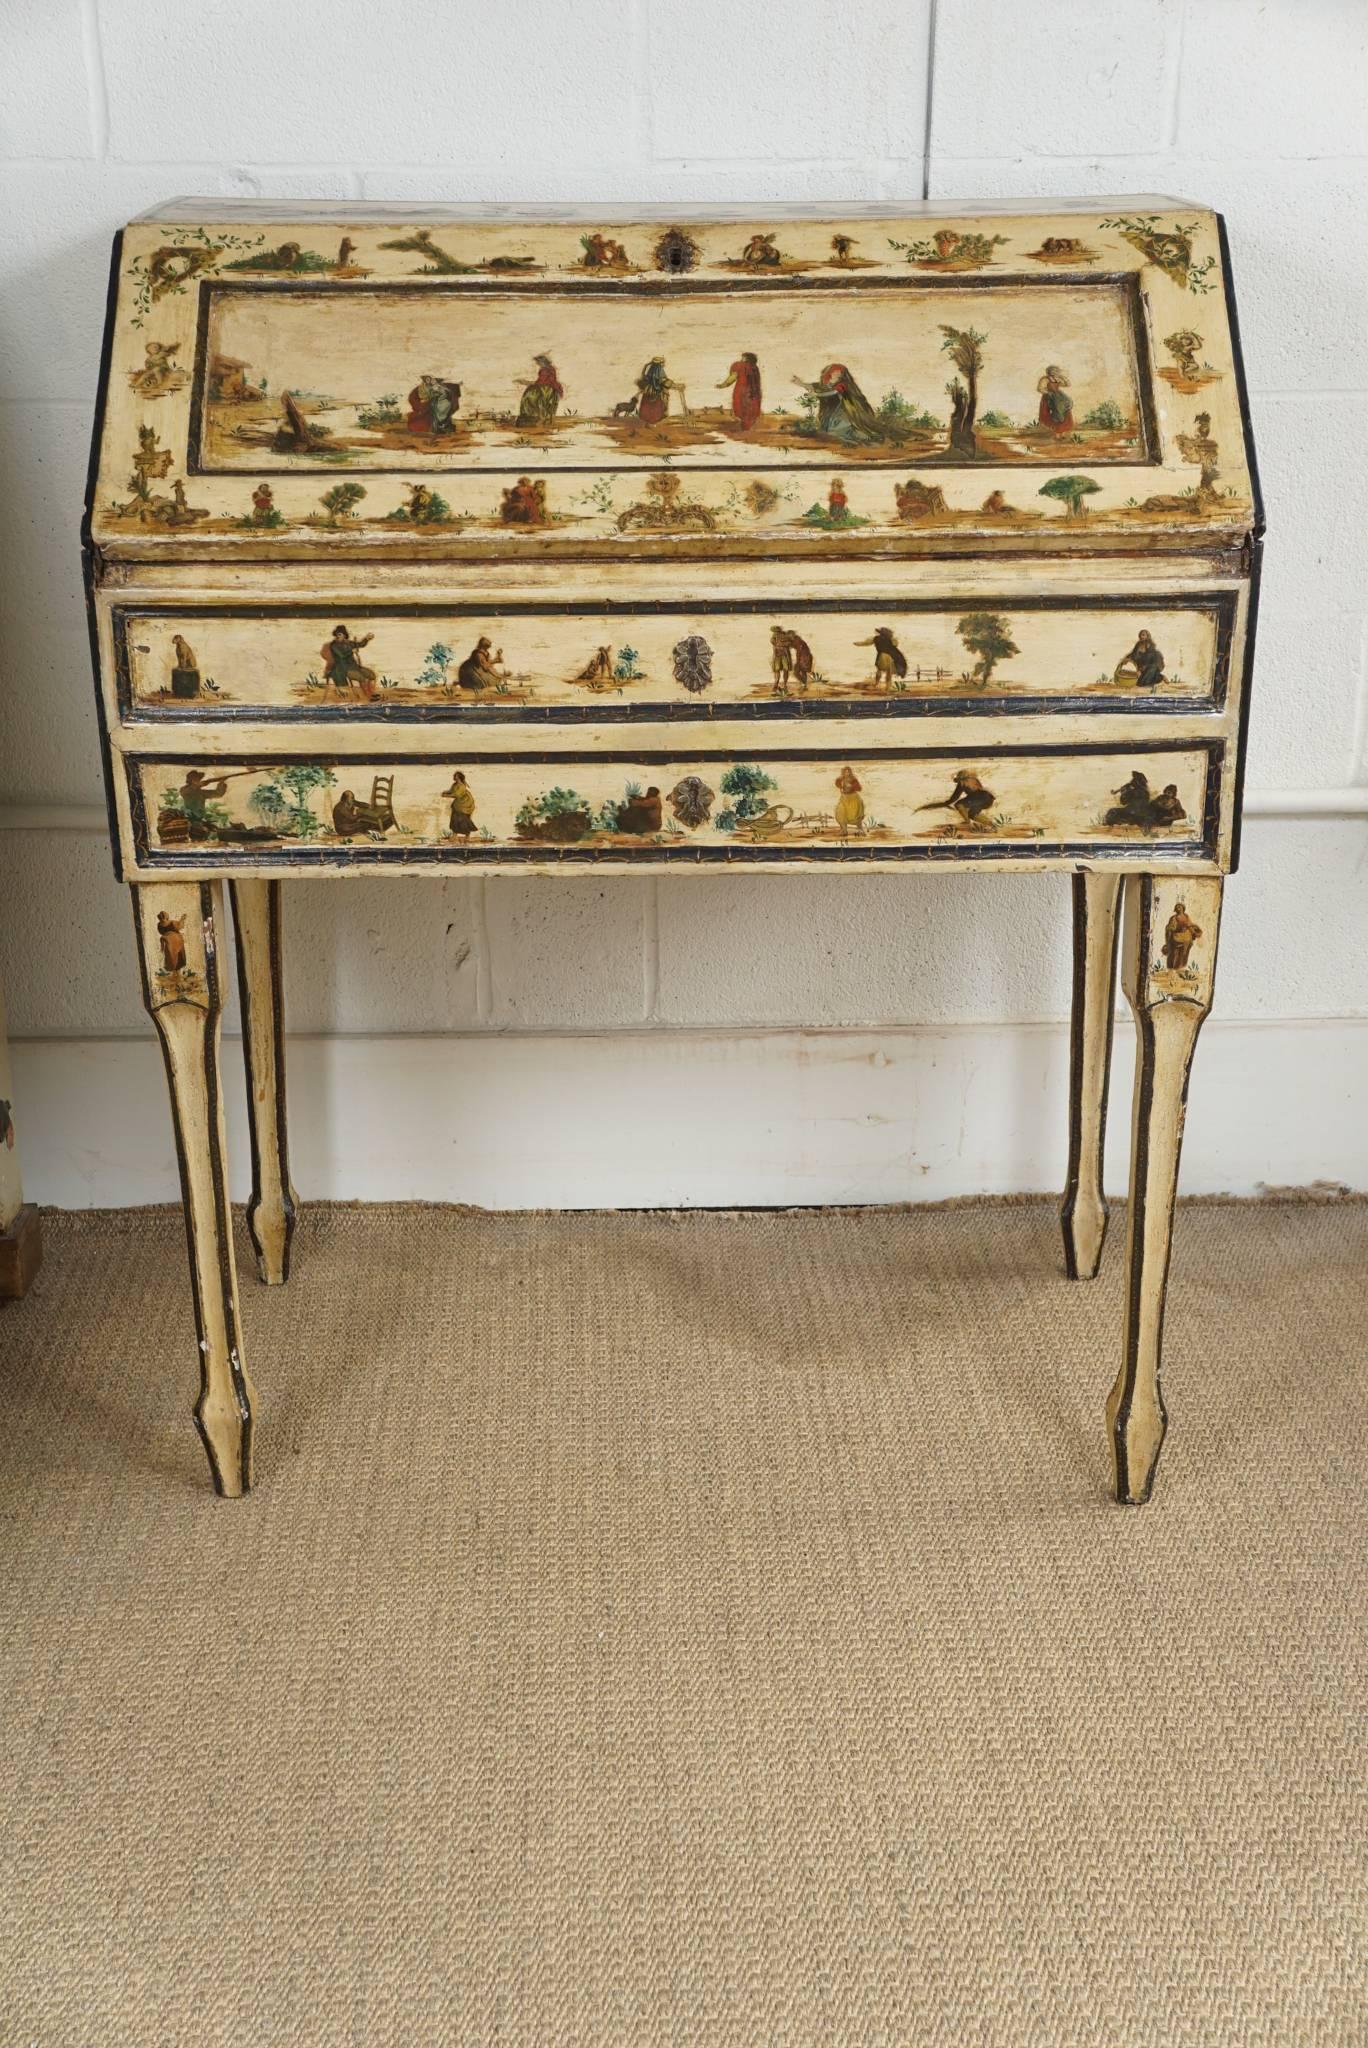 Here is a charming painted Italian desk with decoupaged figures and scenes. The desk has a drop front with link chain that has been recently added but not shown.